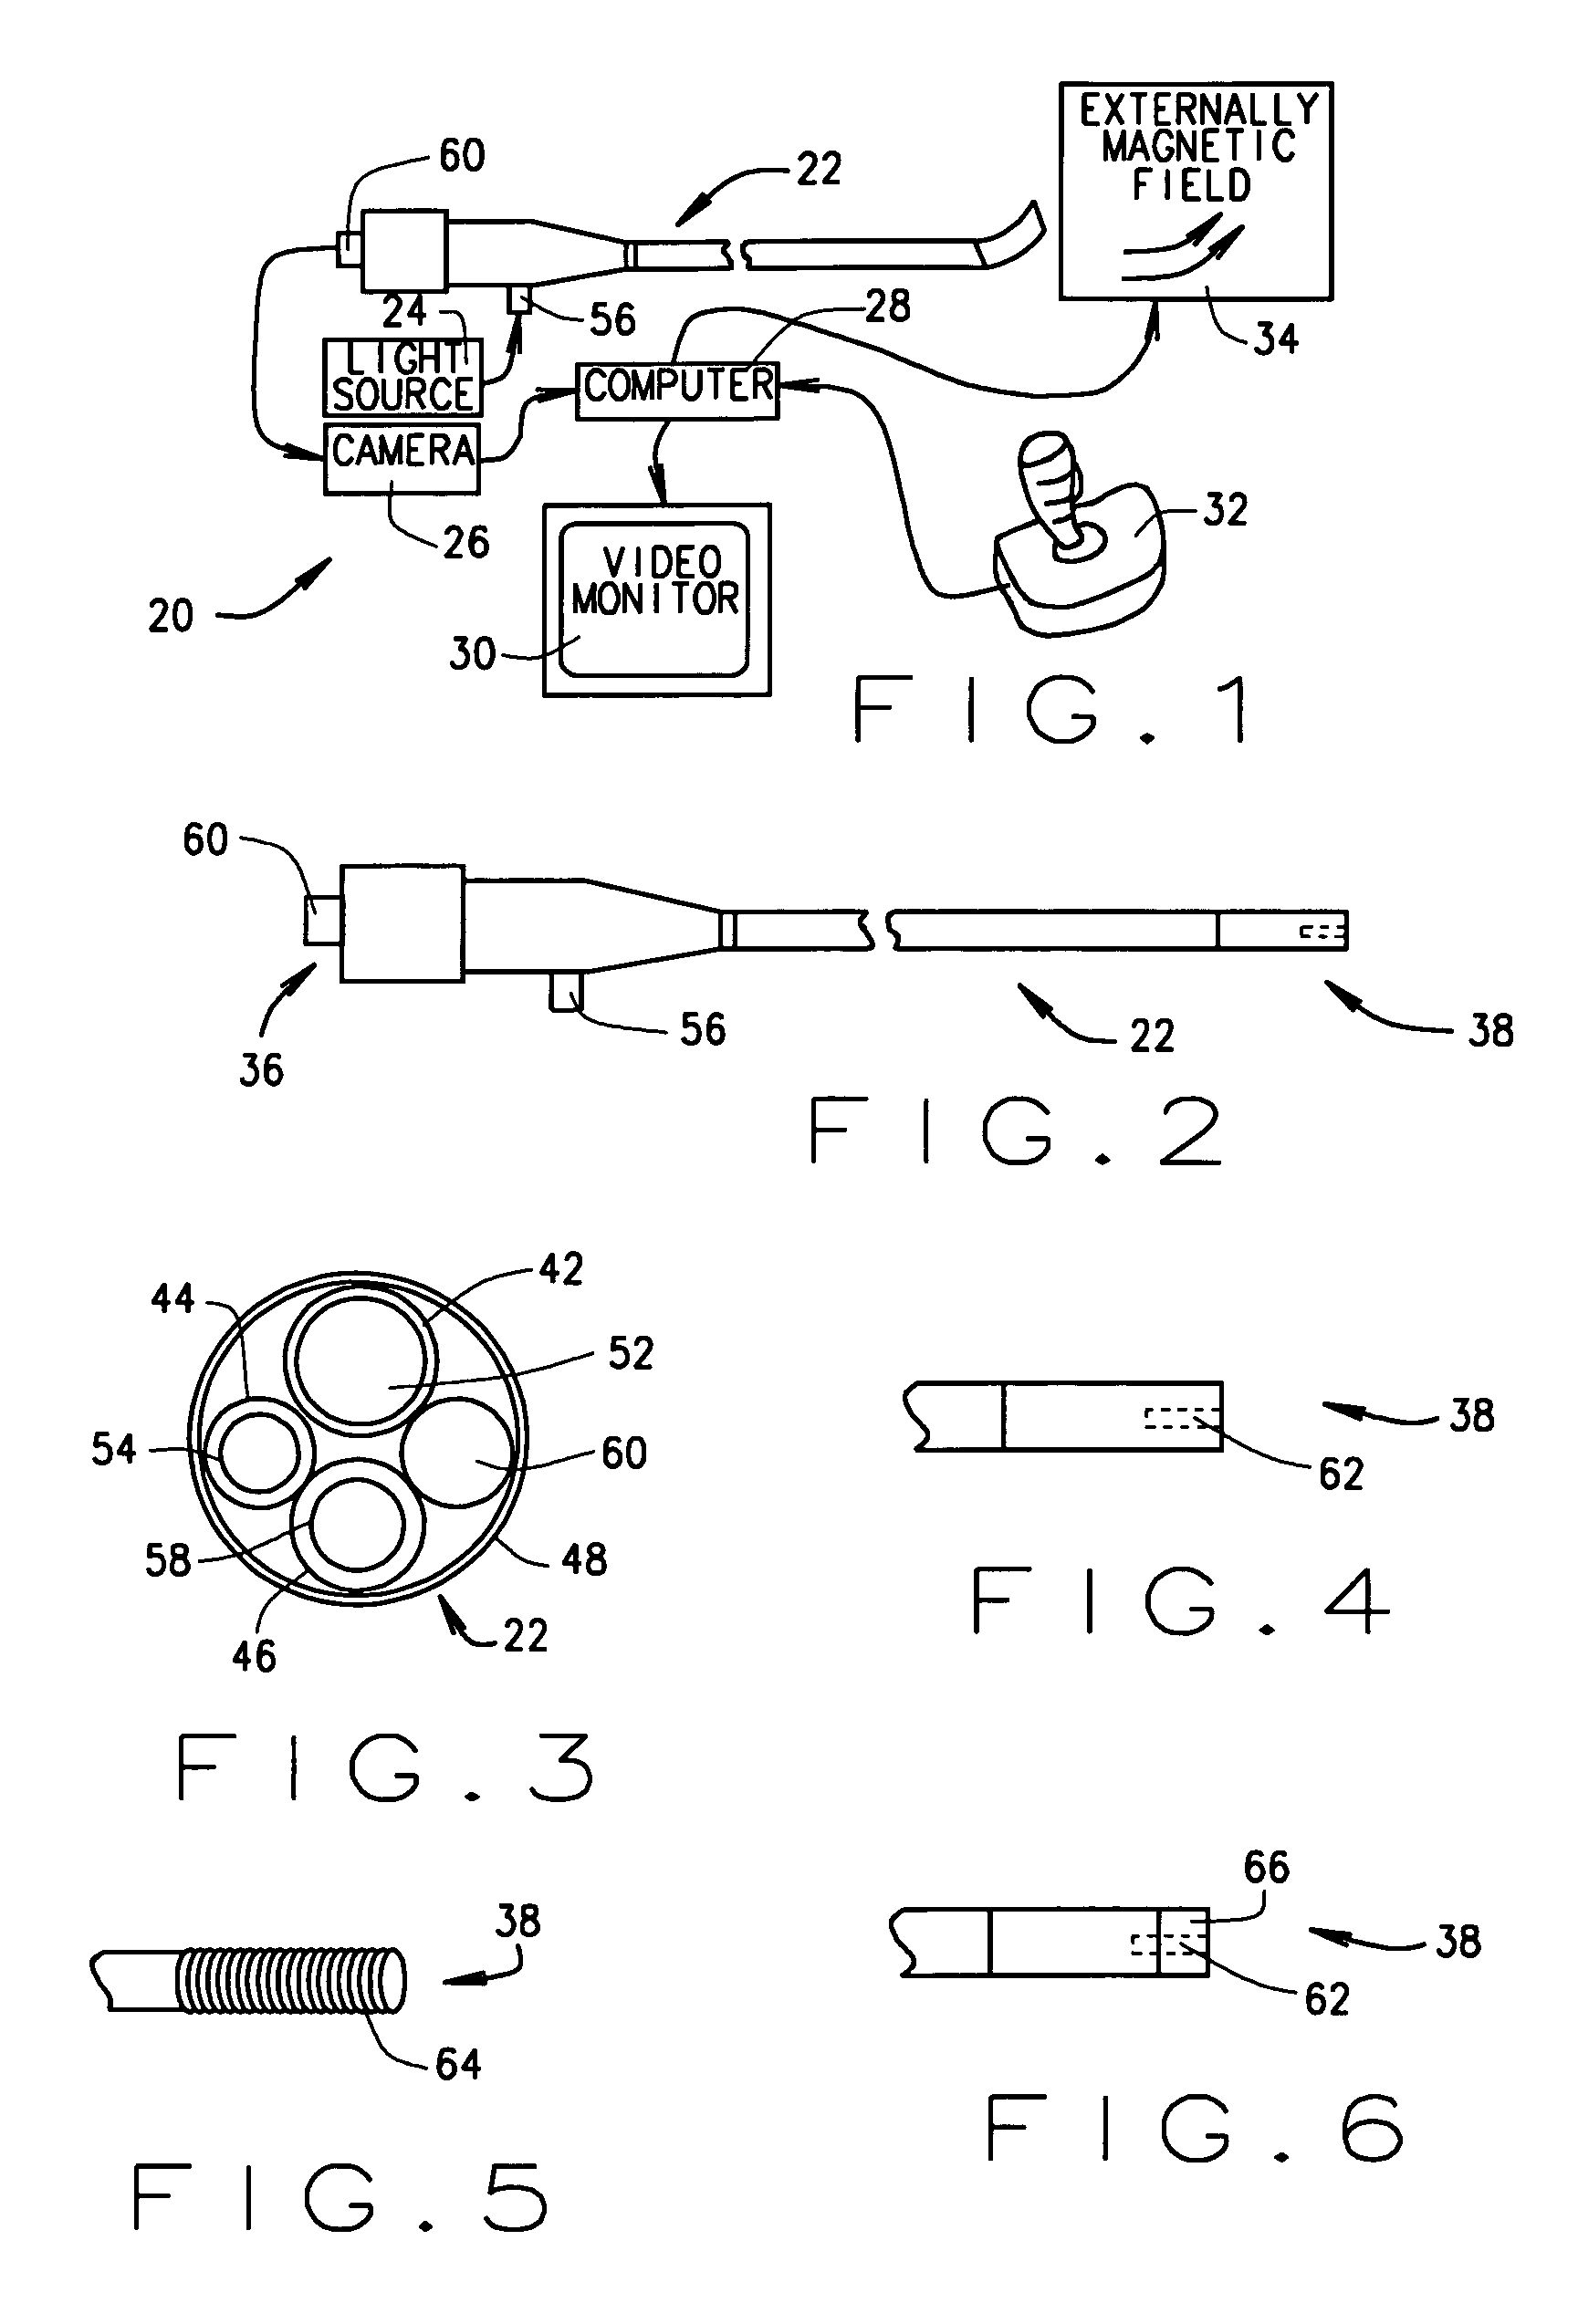 Method and apparatus for magnetically controlling endoscopes in body lumens and cavities